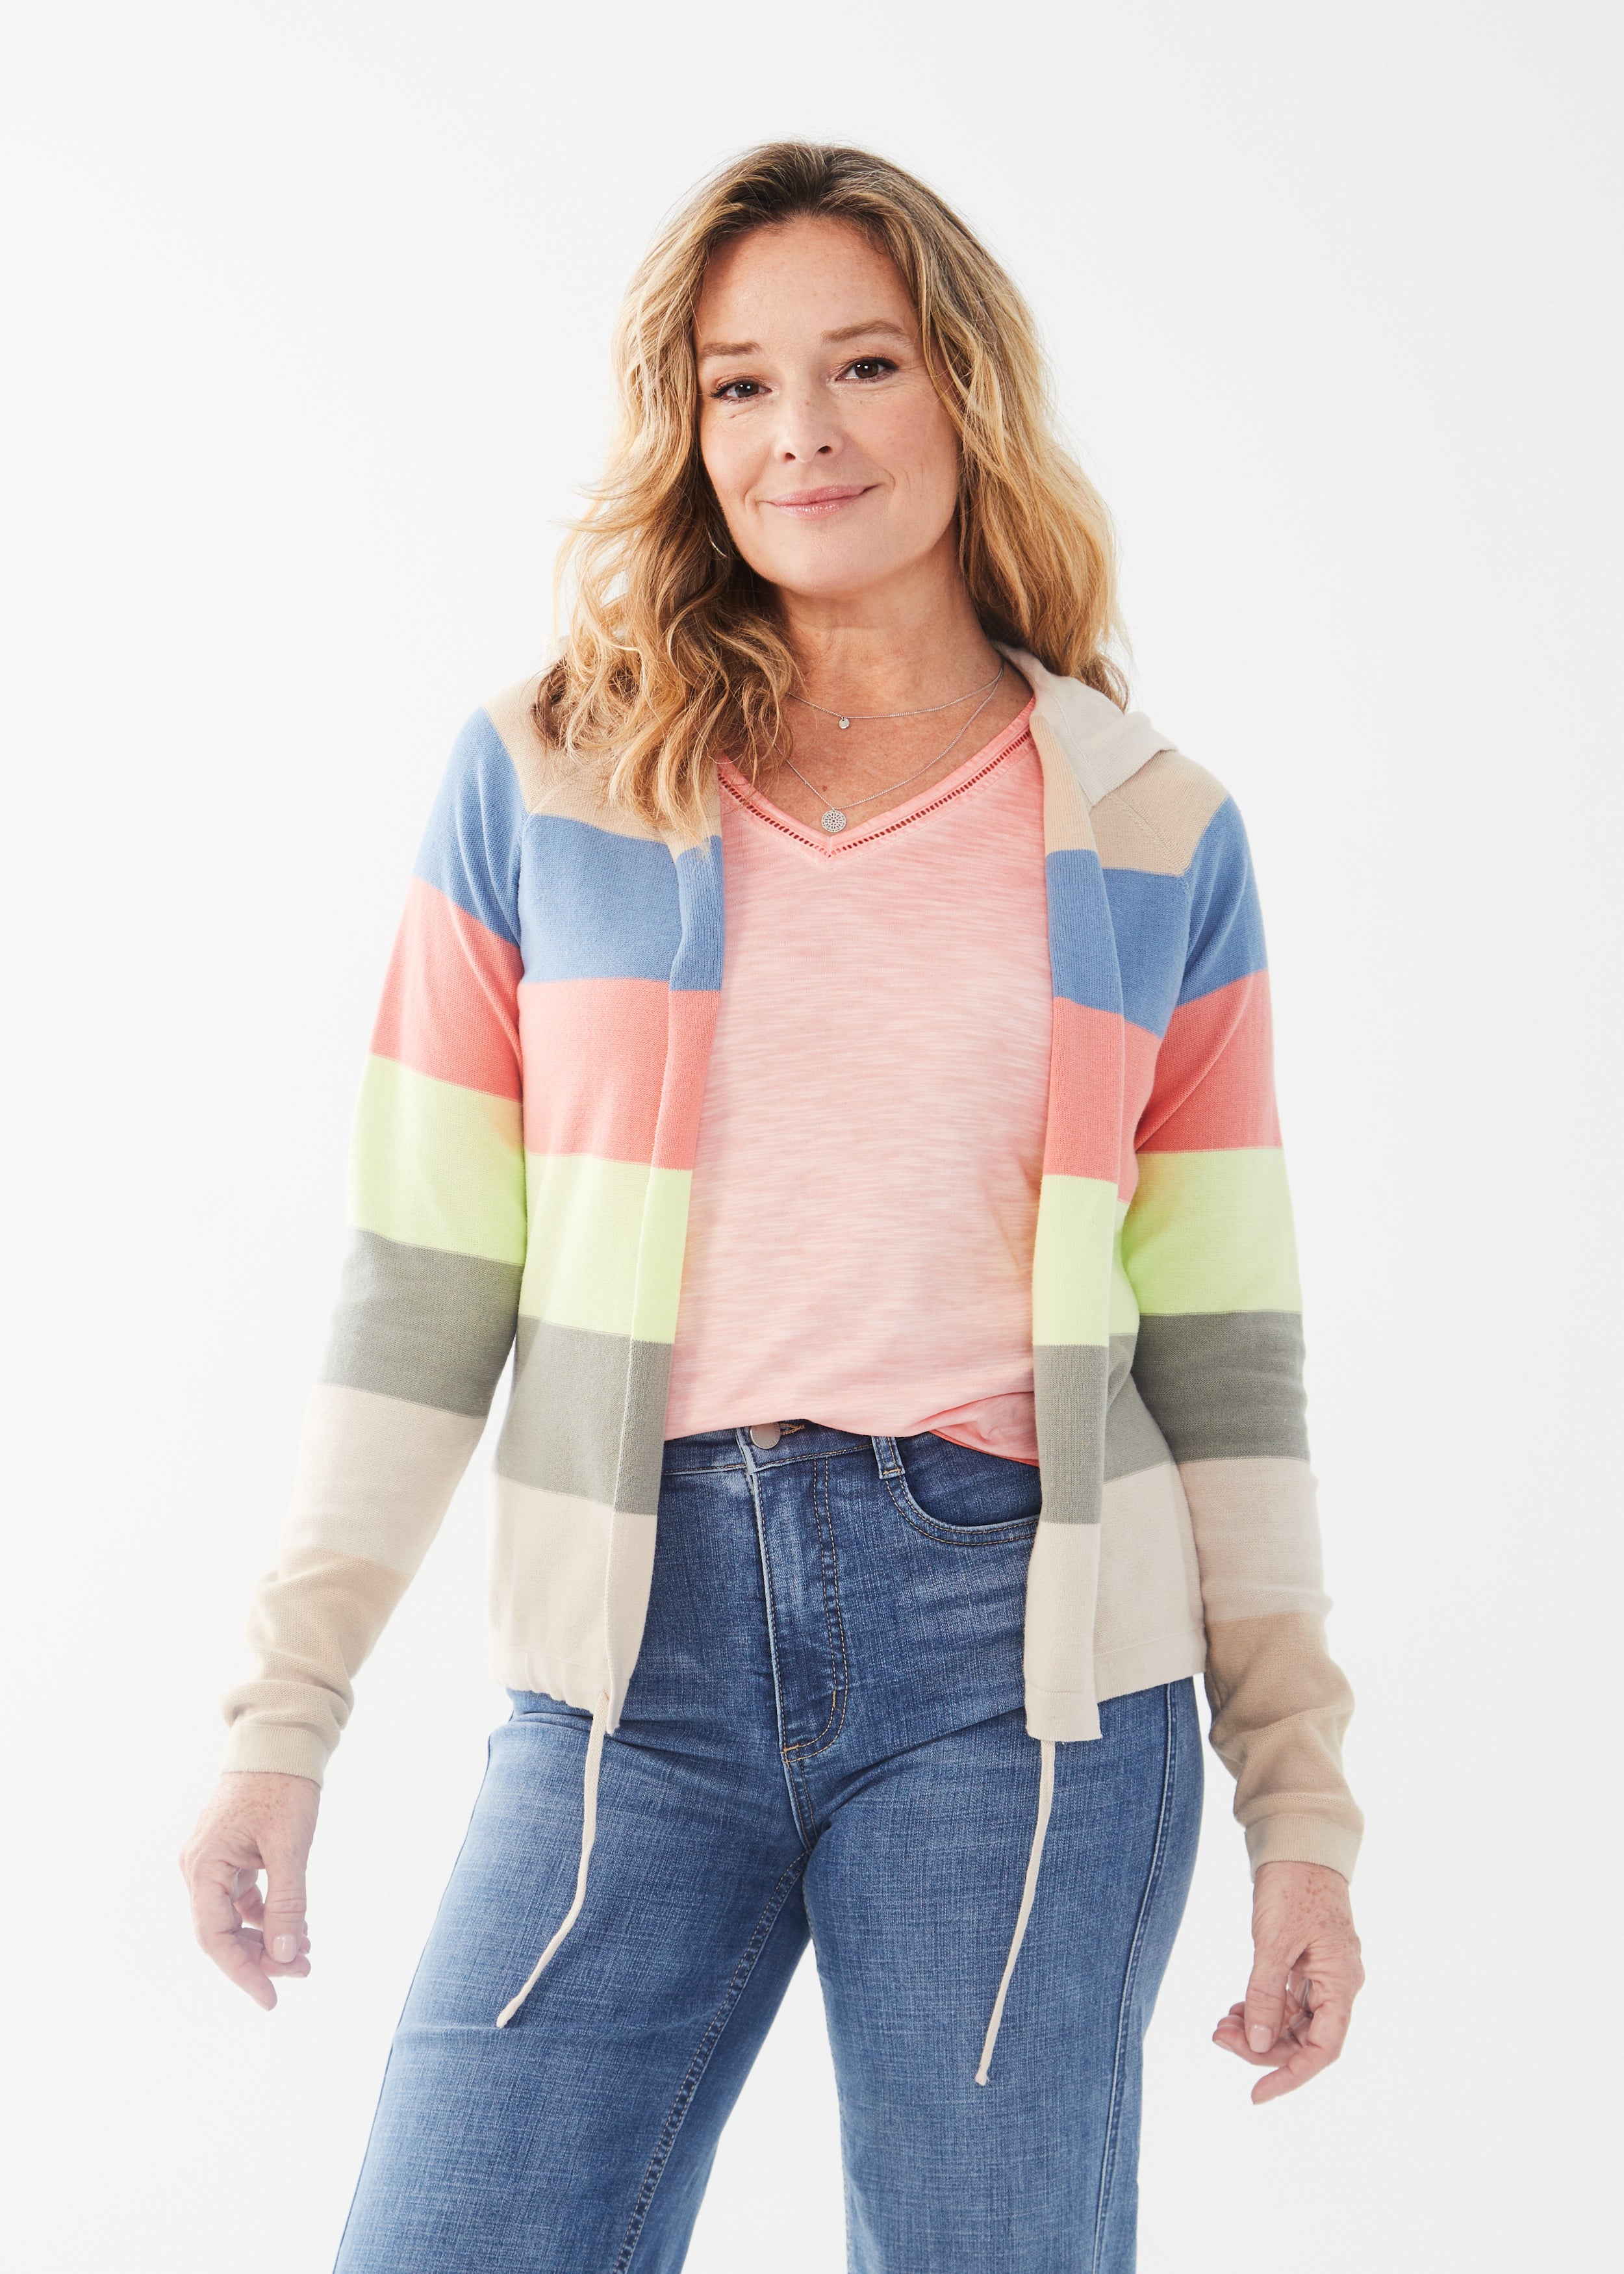 Stay cozy in style with the FDJ Striped Hooded Cardigan. Made with 100% cotton, this cardigan features a playful multi-coloured stripe design. Perfect for adding a pop of personality to any outfit!